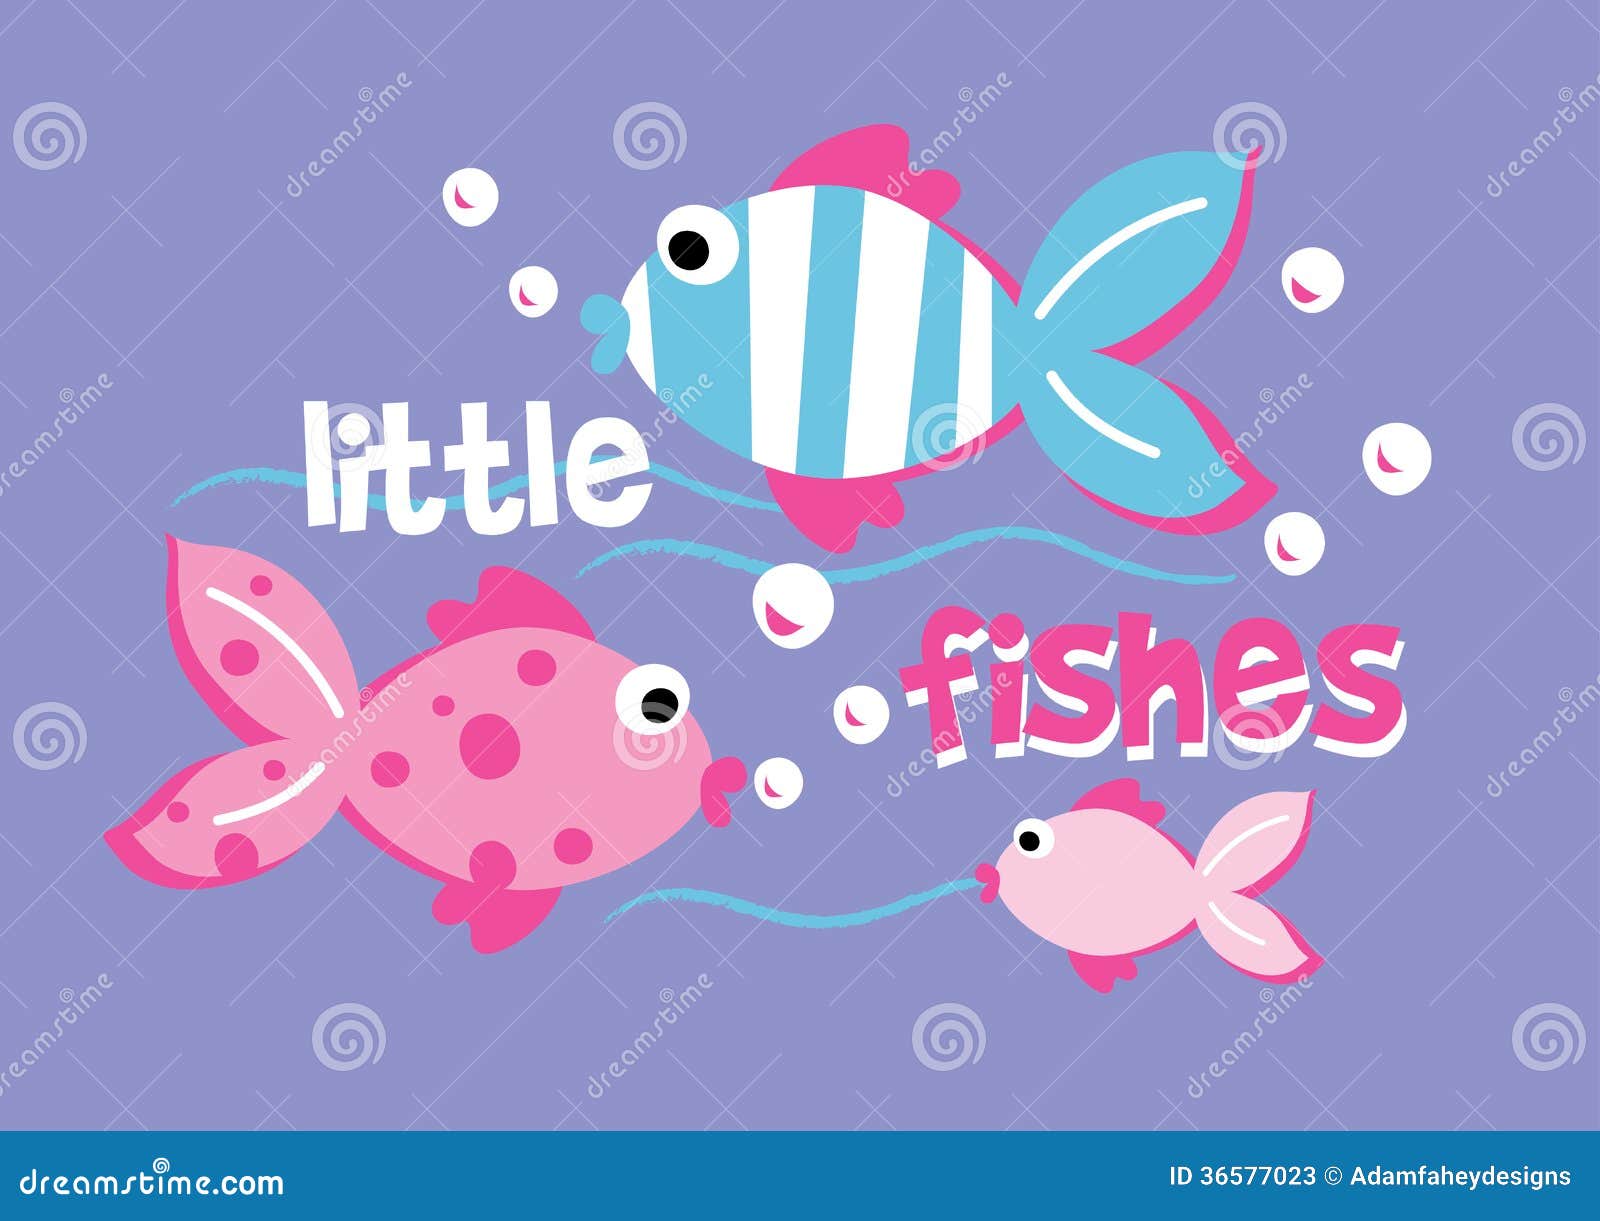 Little fishes. Vector illustration of fish swimming.